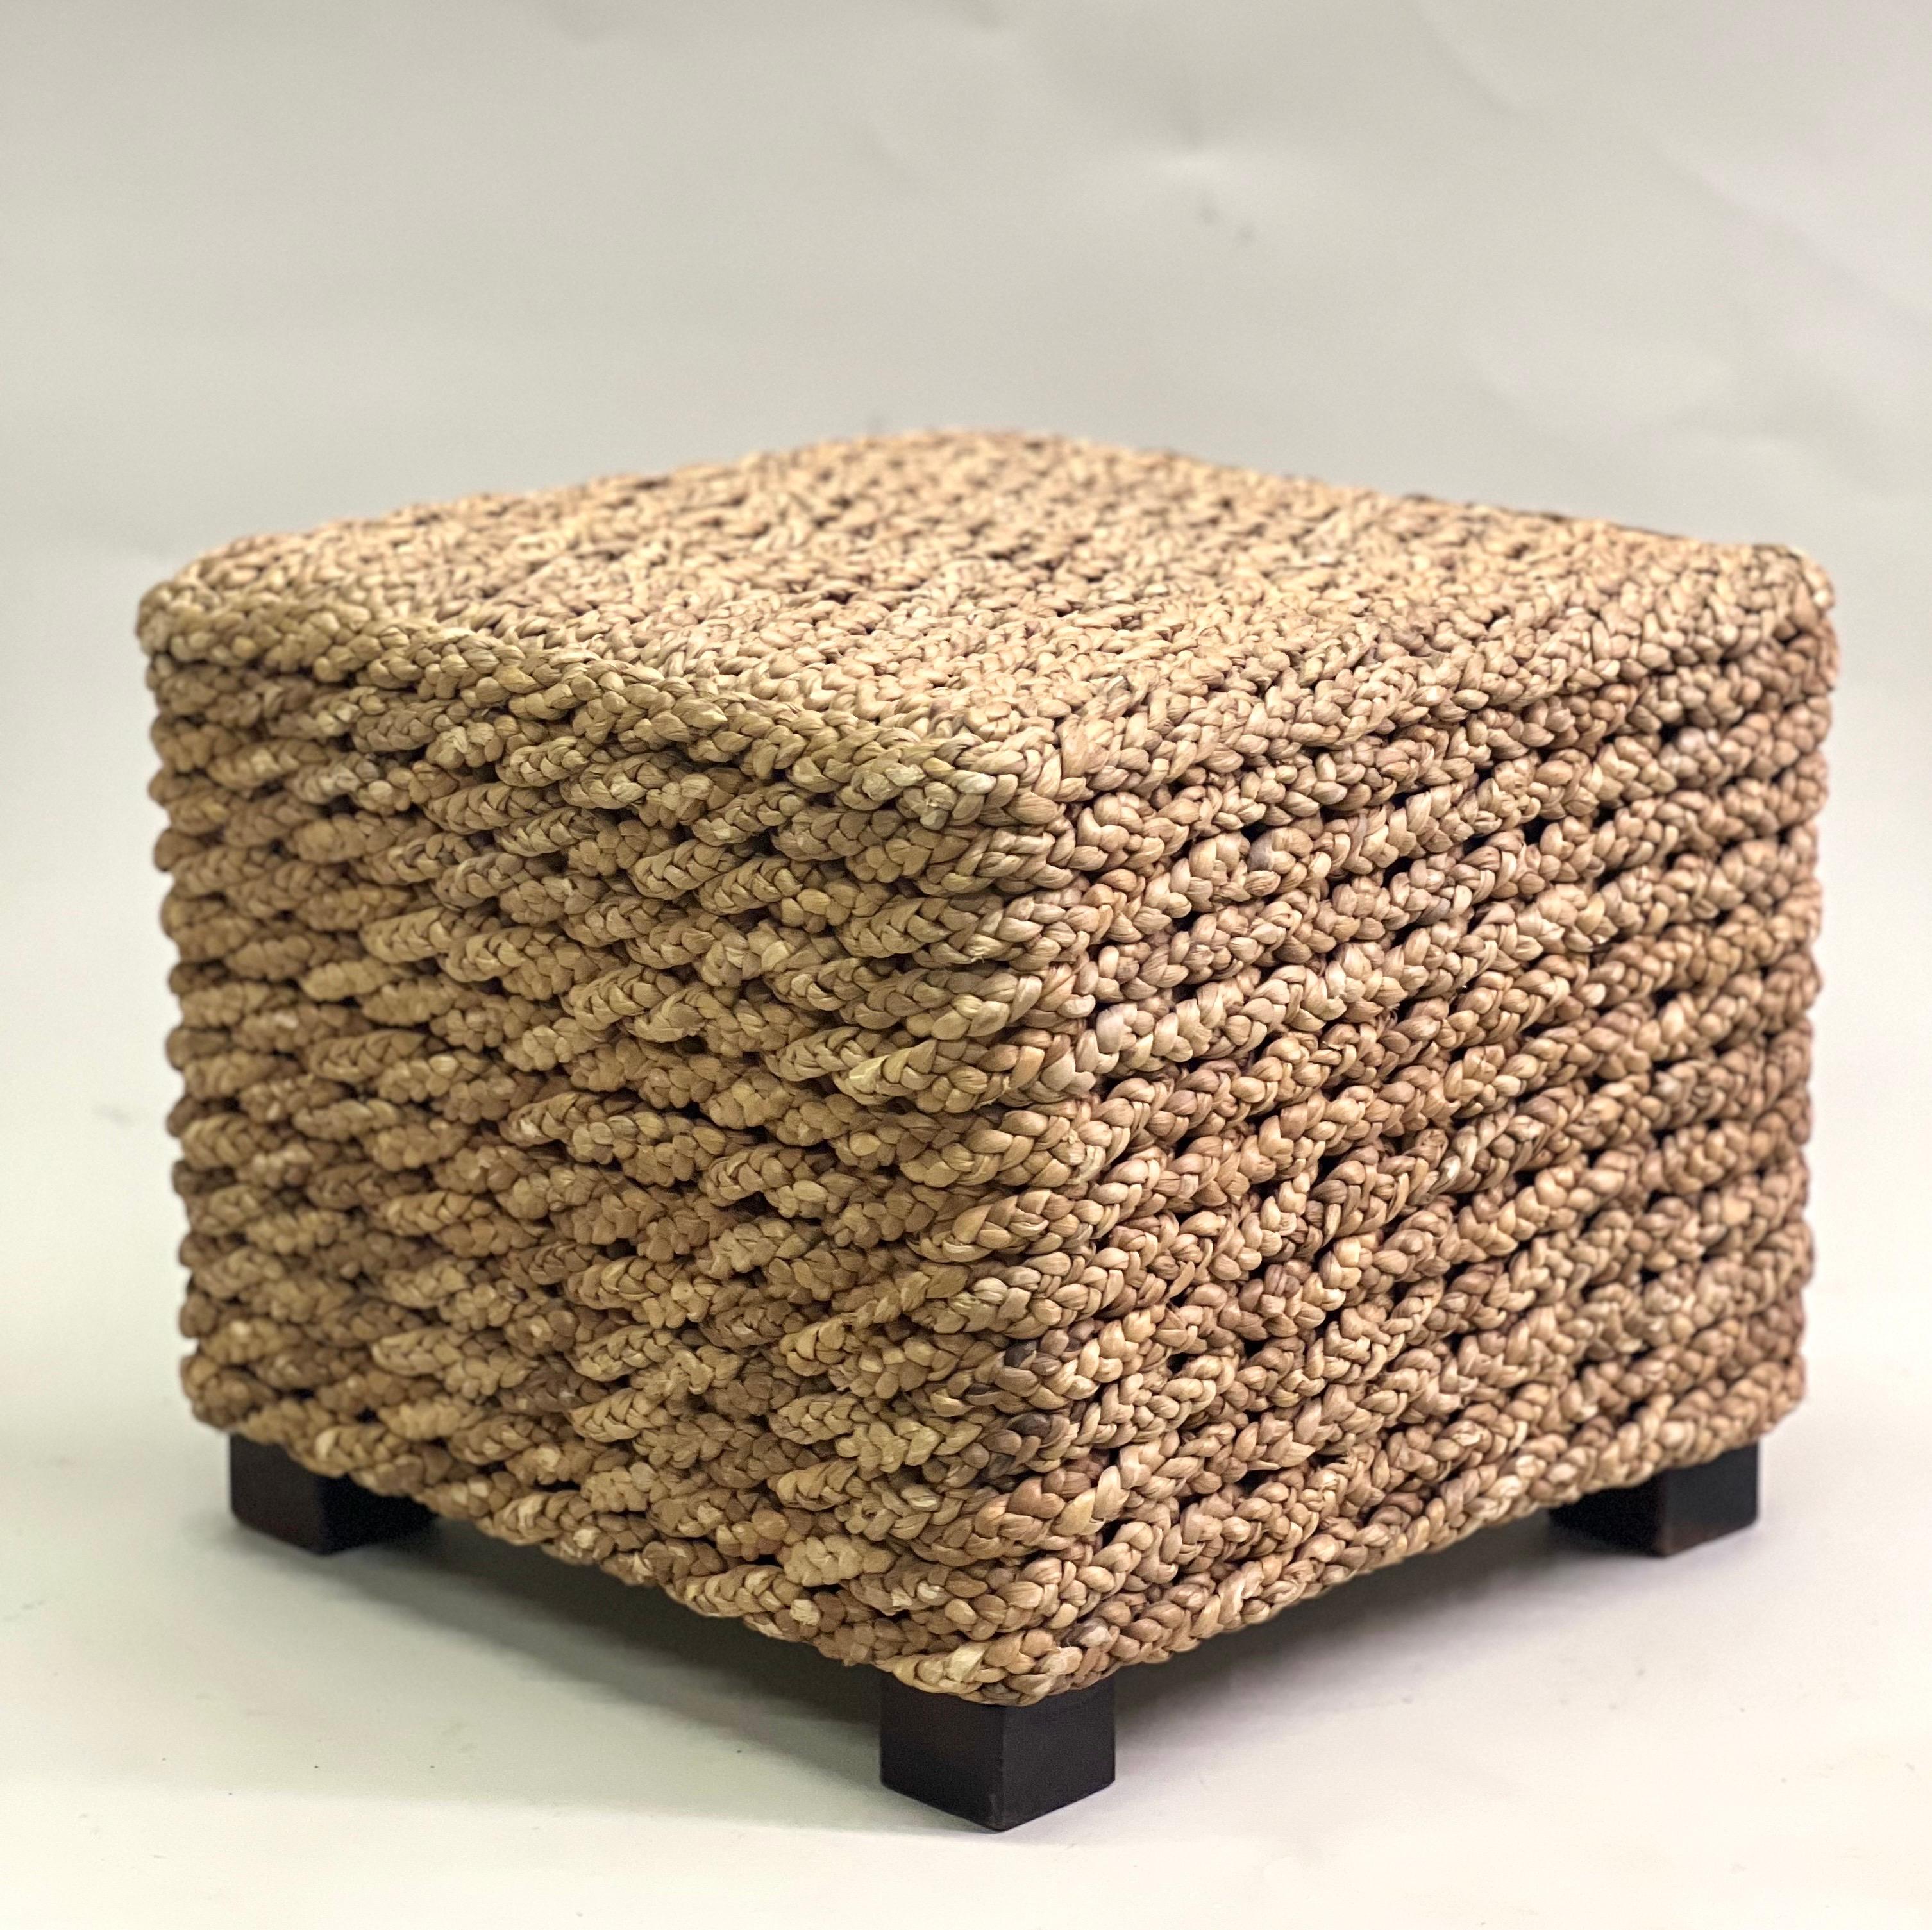 1 French Mid-Century Rope Stool / Bench by Adrien Audoux & Frida Minet In Good Condition For Sale In New York, NY